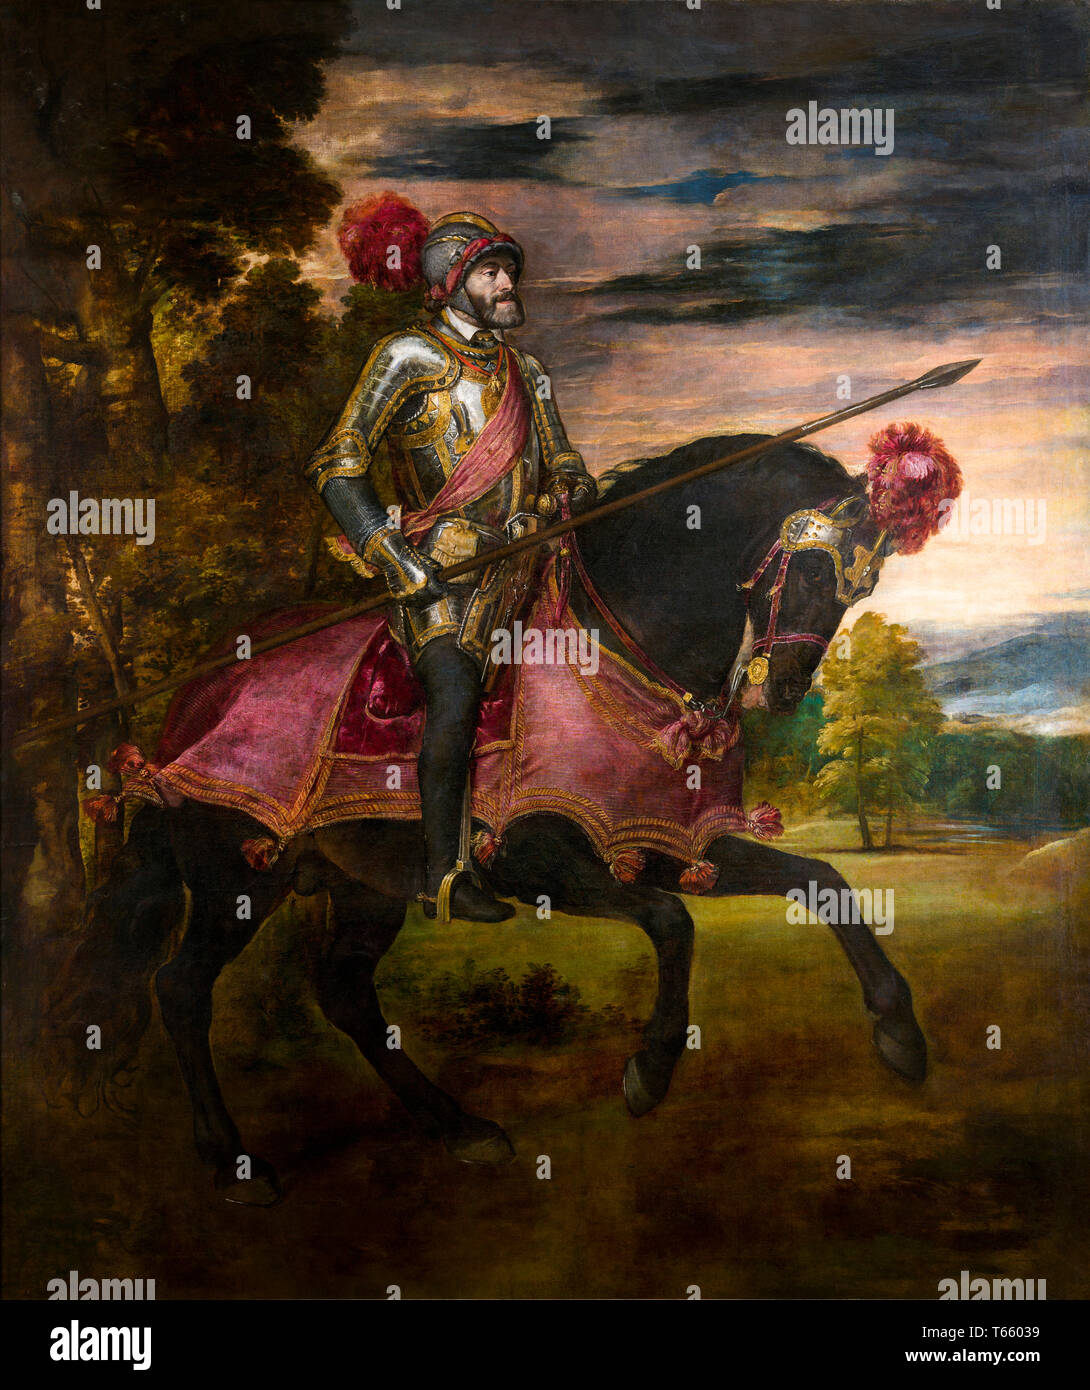 Titian: Equestrian Portrait of Charles V (1500-1558), Holy Roman Emperor, 1519-1556, painting, 1548 Stock Photo